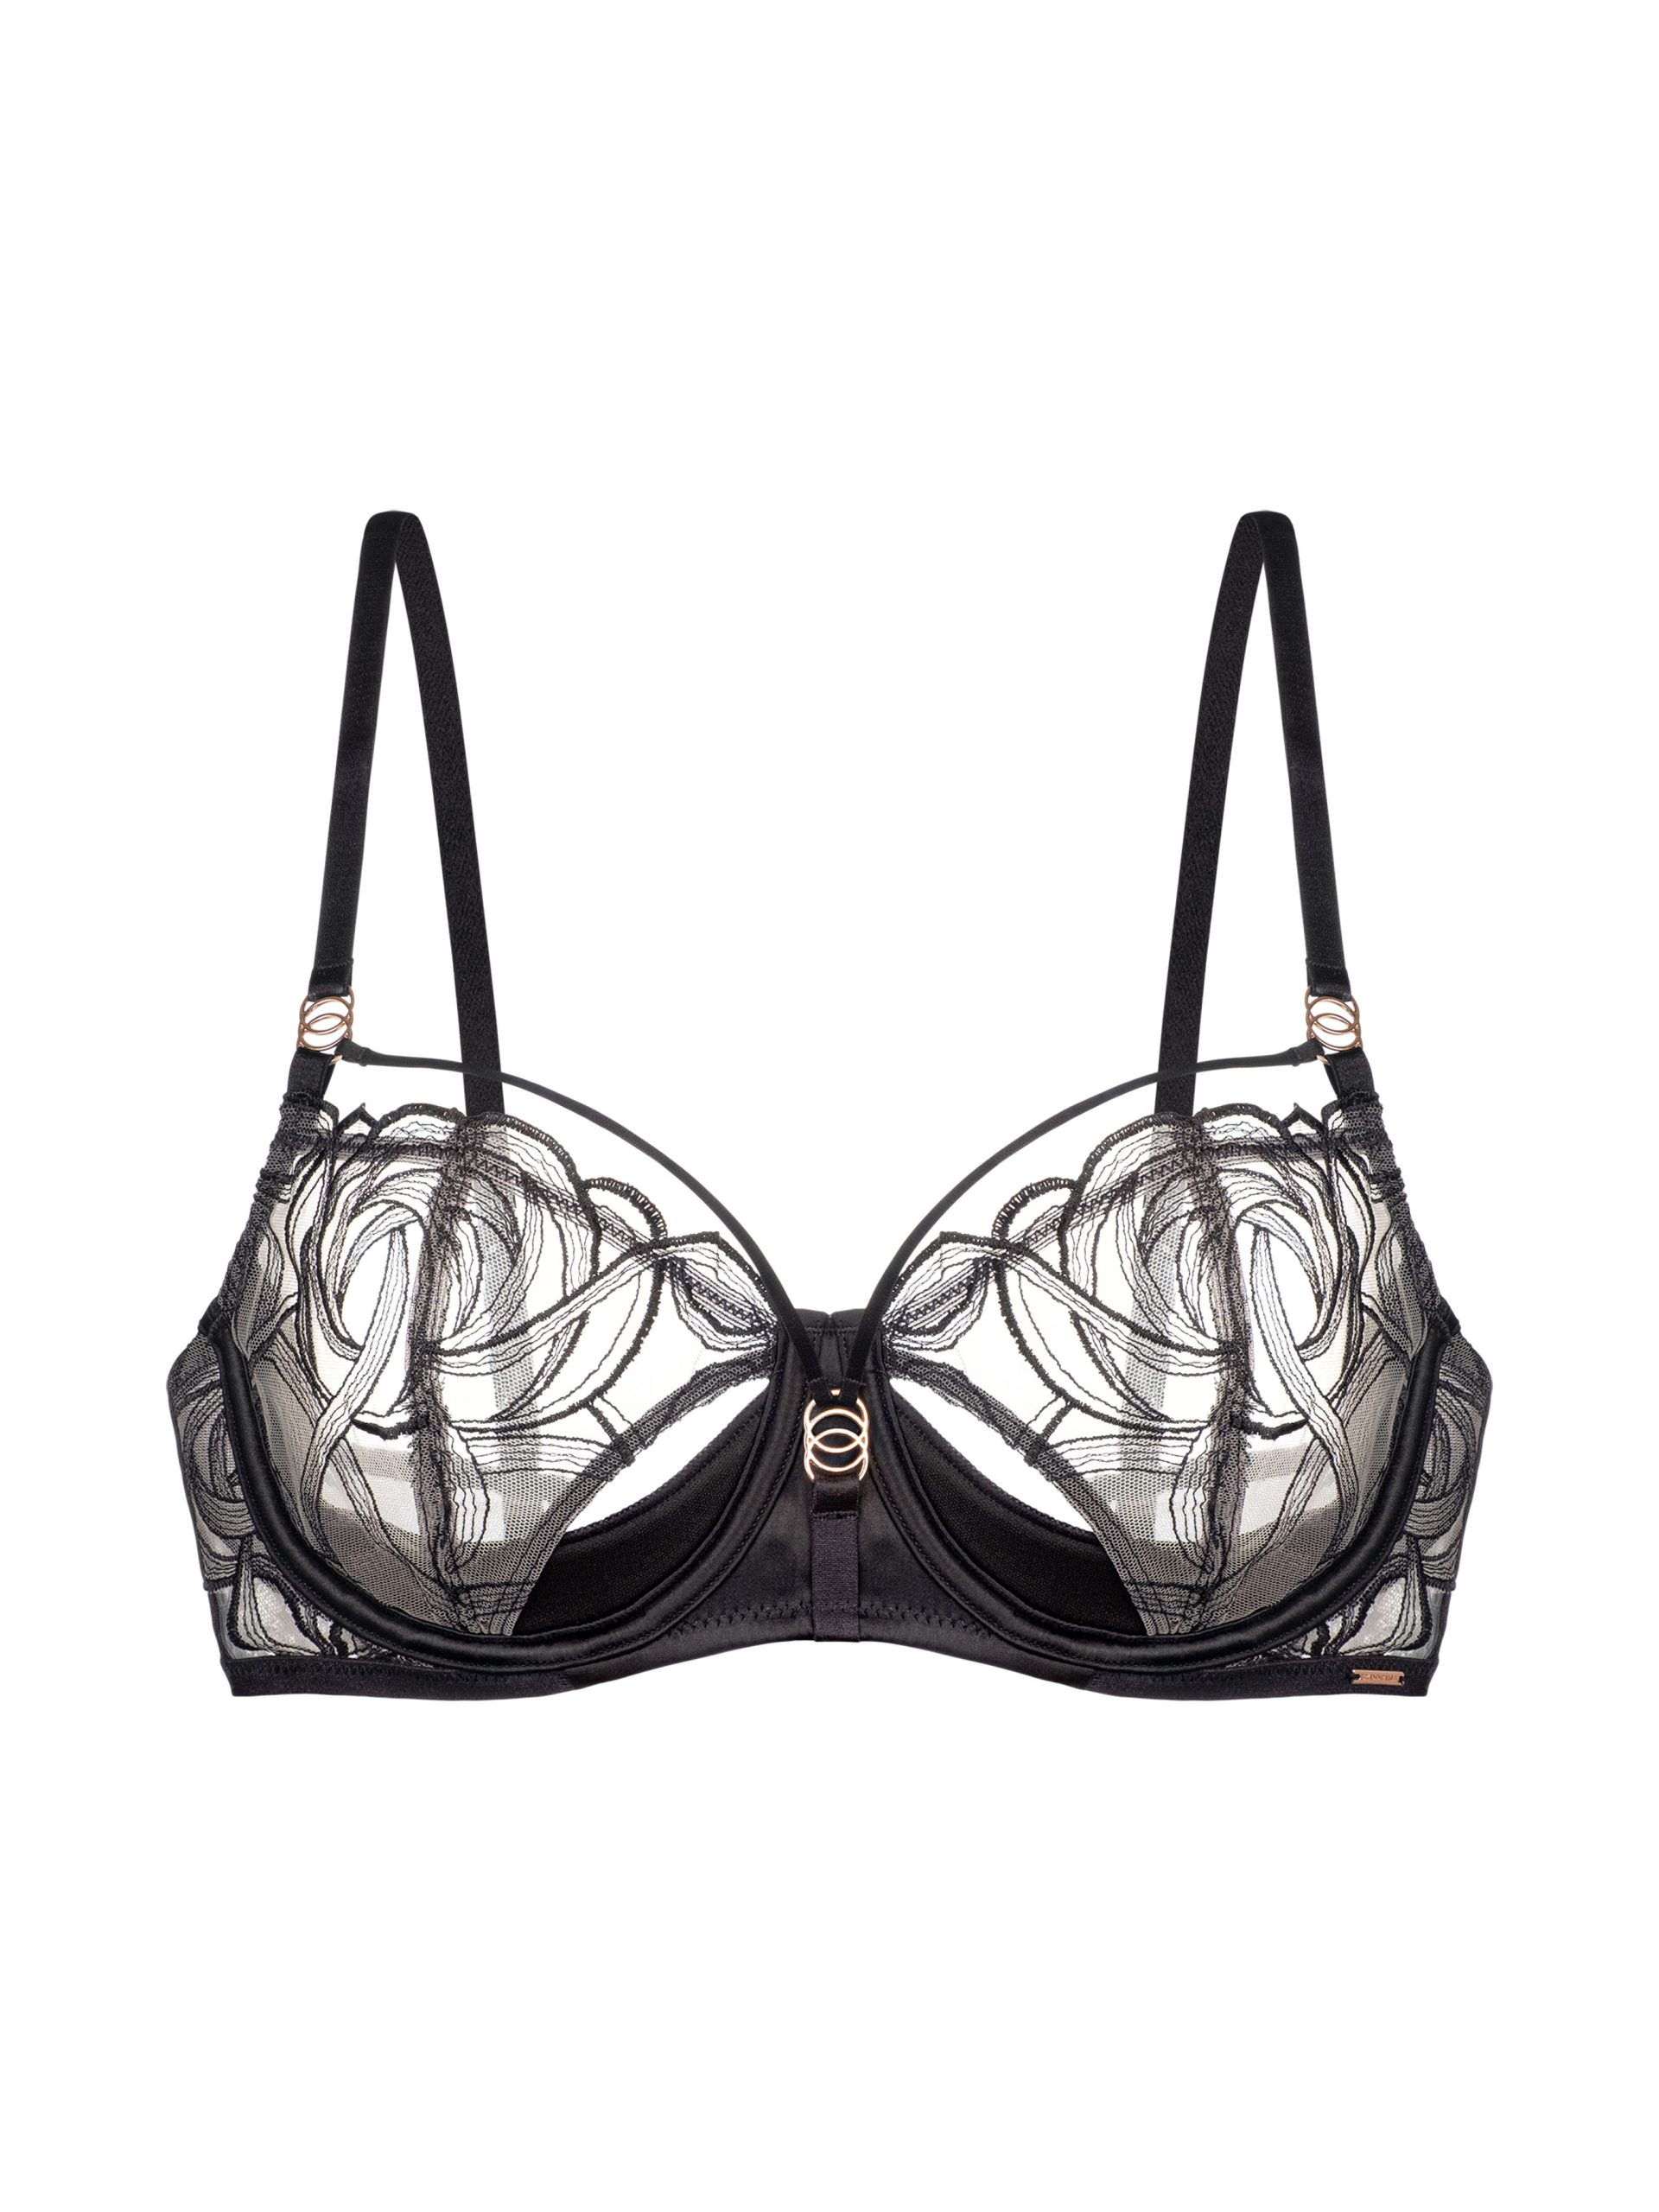 💯CROWD'S FAVOURITE OBSESSION BRA WIRED / MEDIUM PUSH UP LEVEL 2